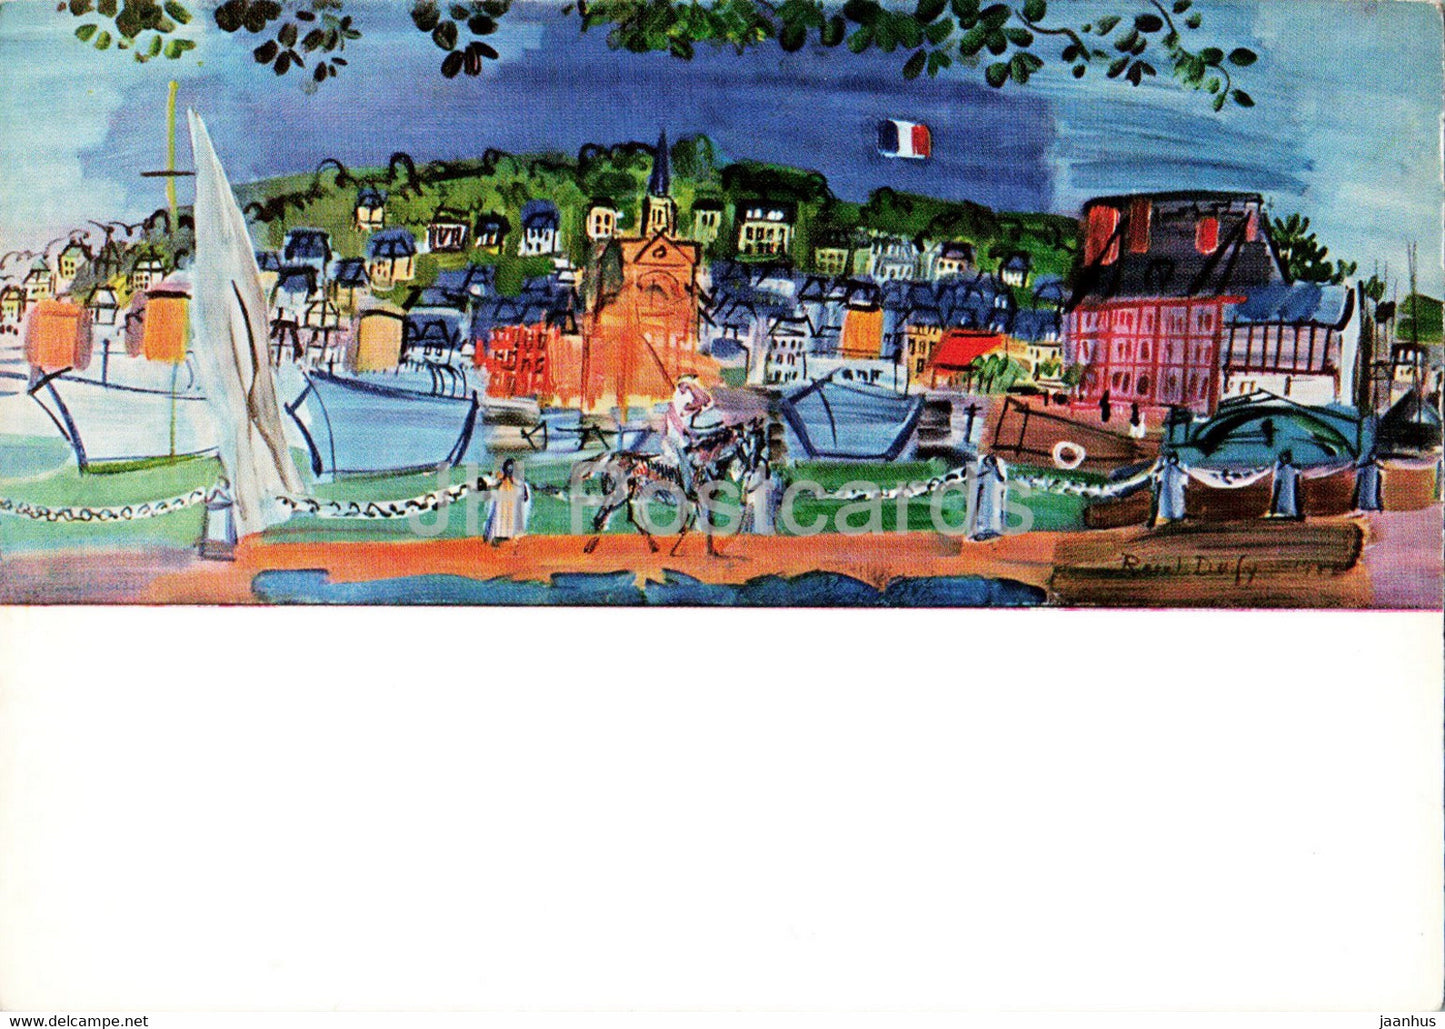 painting by Raoul Dufy - Regatta 1938 - sailing boat - French art - Netherlands - unused - JH Postcards